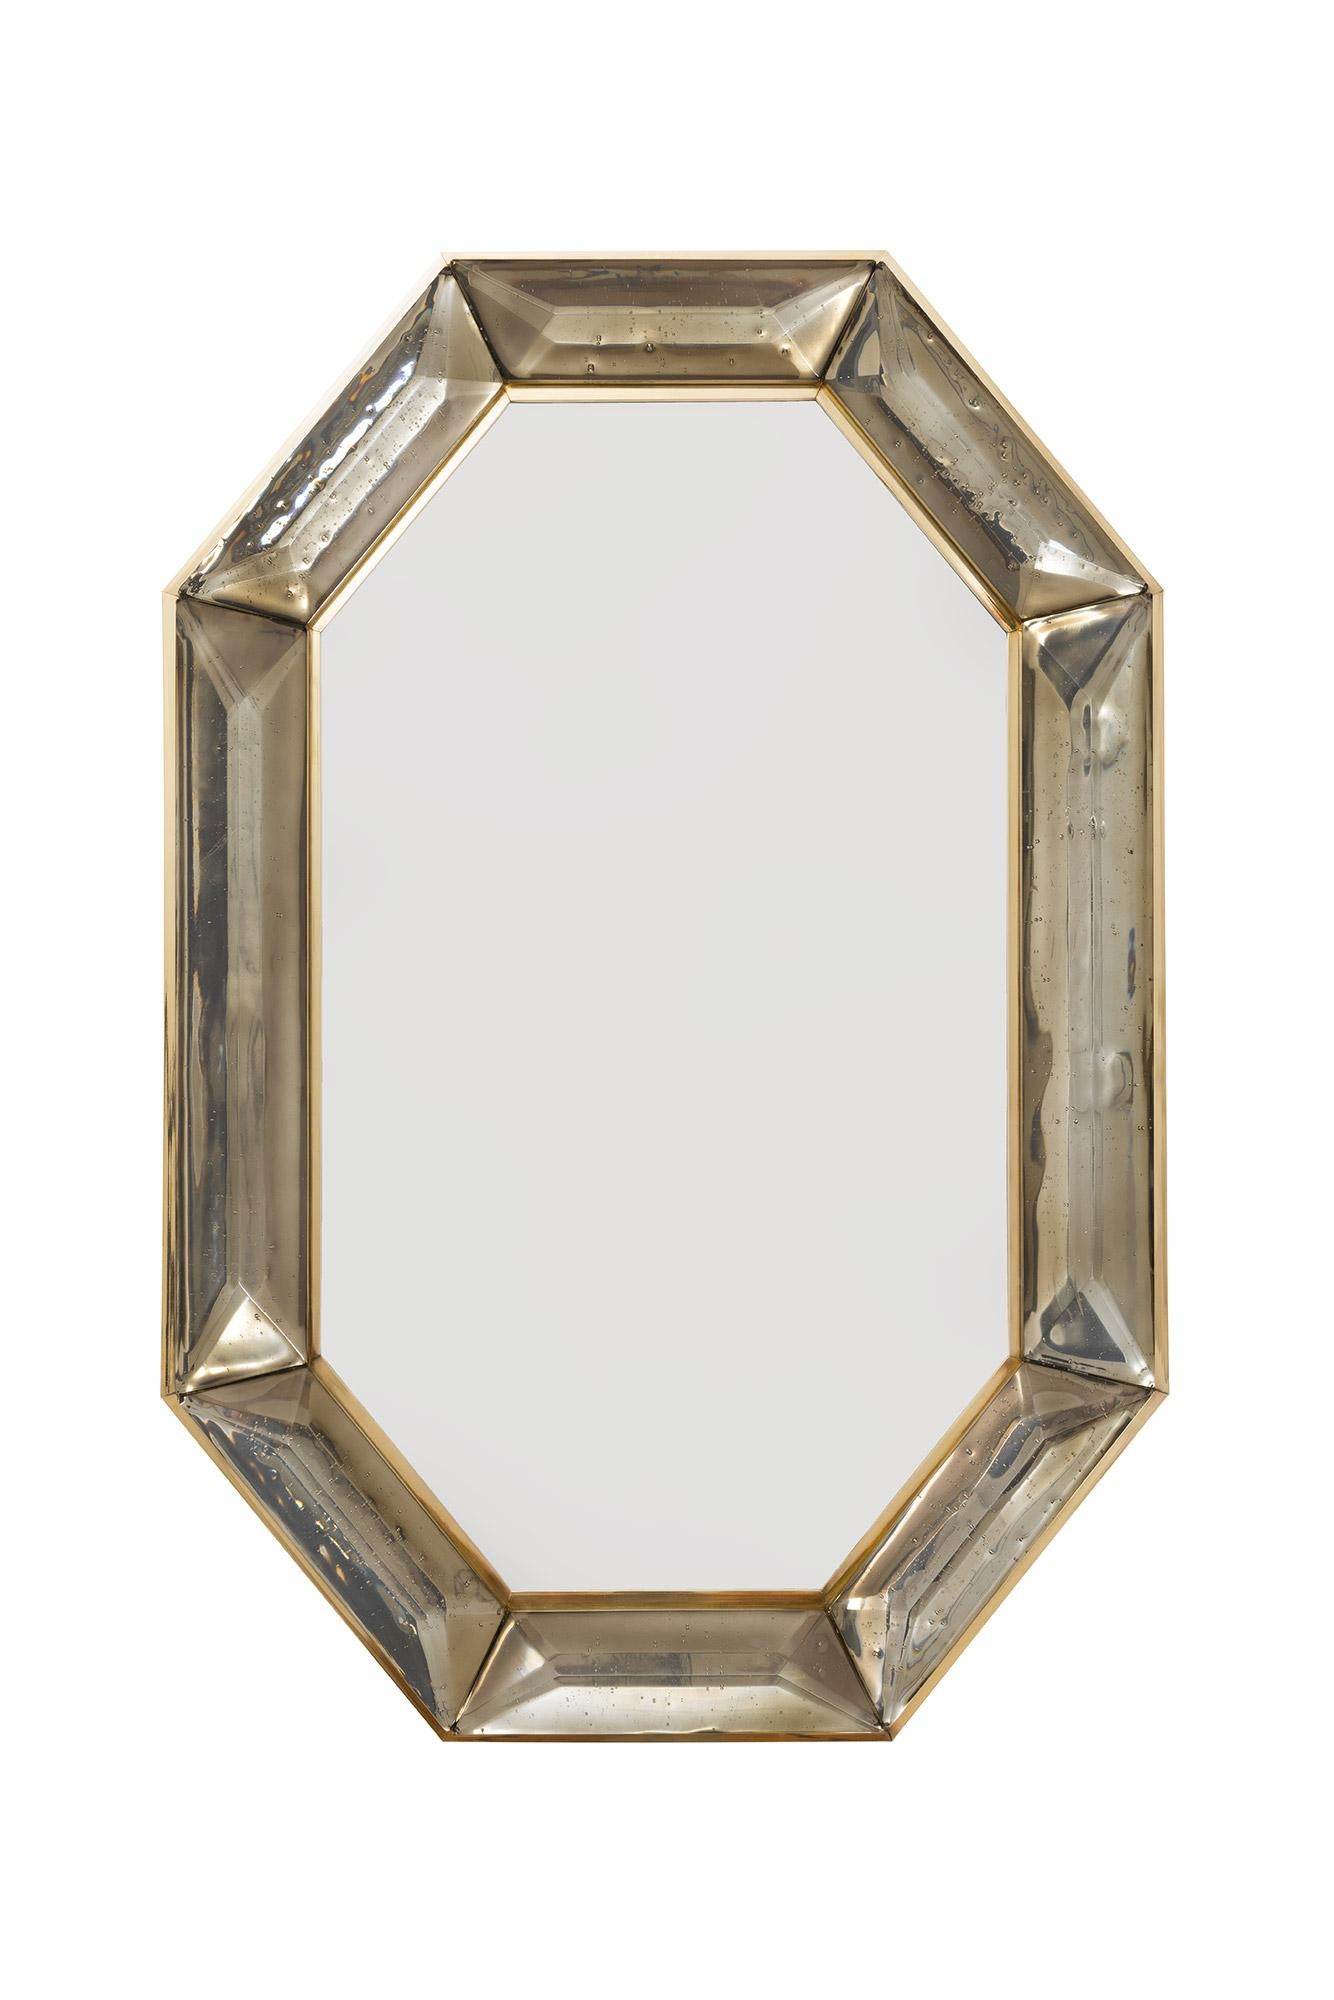 Pair of bespoke octagon smoked Murano glass mirror, in stock
 Vivid and intense smoked or bronze glass block with naturally occurring air inclusions throughout 
 Highly polished faceted pattern
 Brass gallery all around
 Each mirror is a unique